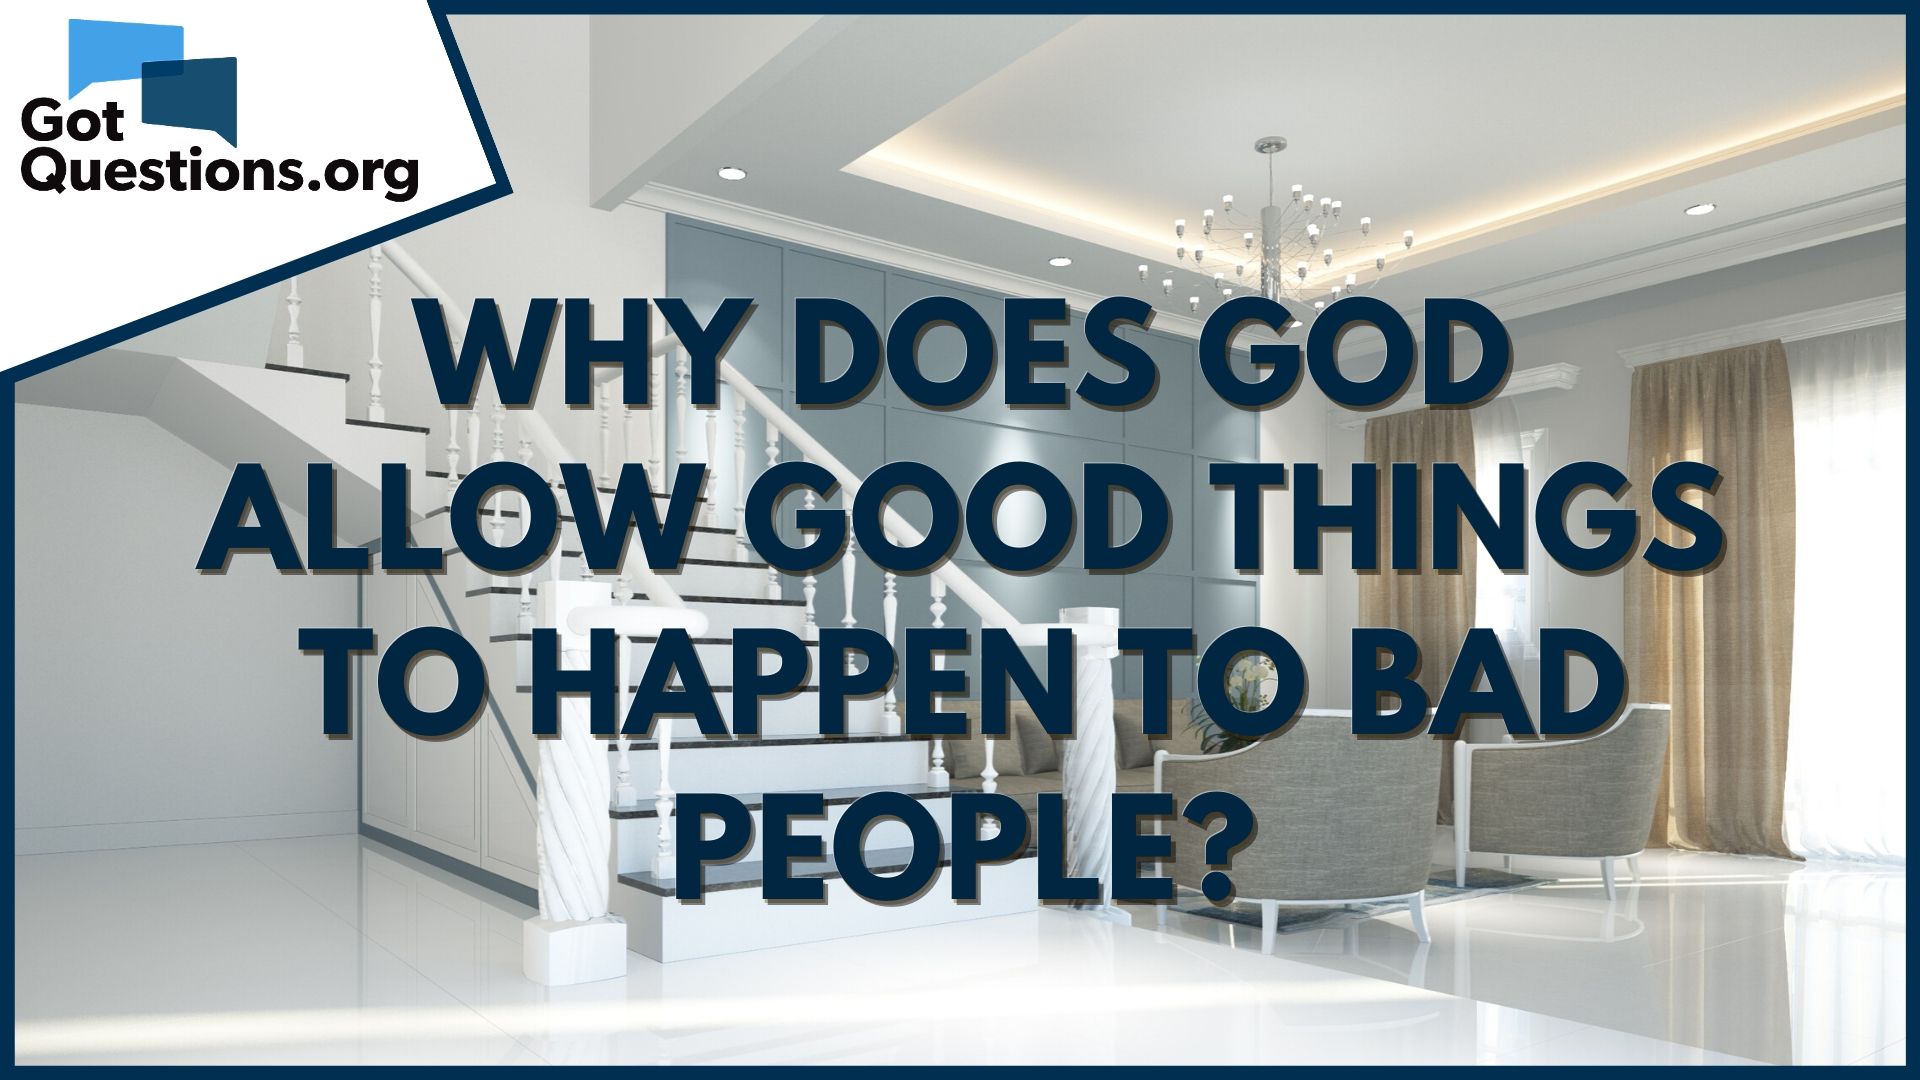 Why does God allow good things to happen to bad people?